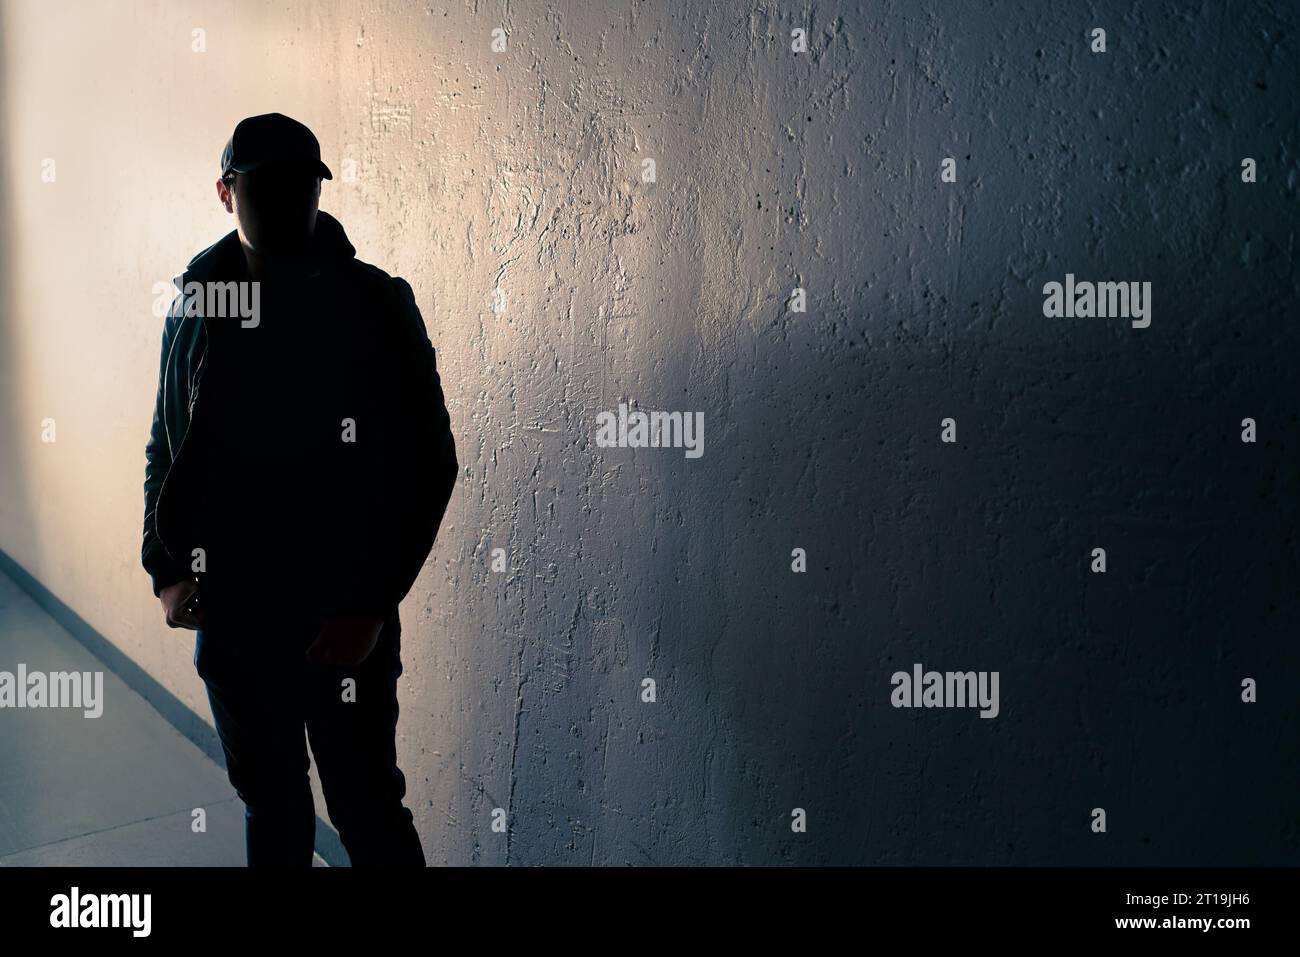 Suspicious man. Silhouette of criminal. Stalker or anonymous stranger. Gang crime, teenage gangster or thief. Dark urban street alley. Face hidden. Stock Photo